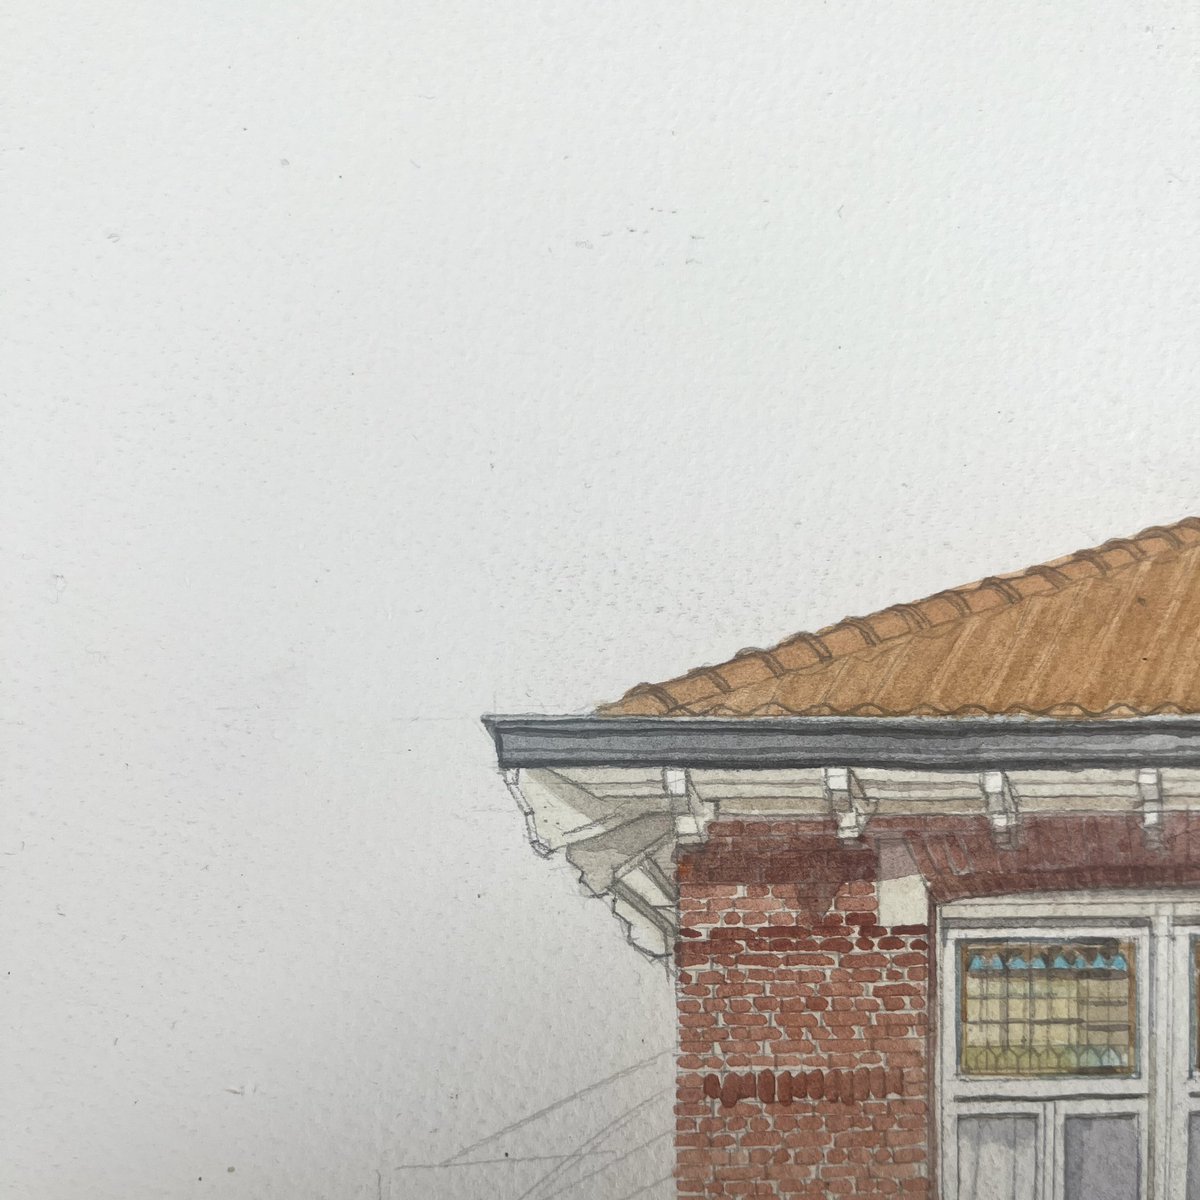 Small detail, work in progress - for a change working on a Dutch house (those bricks)